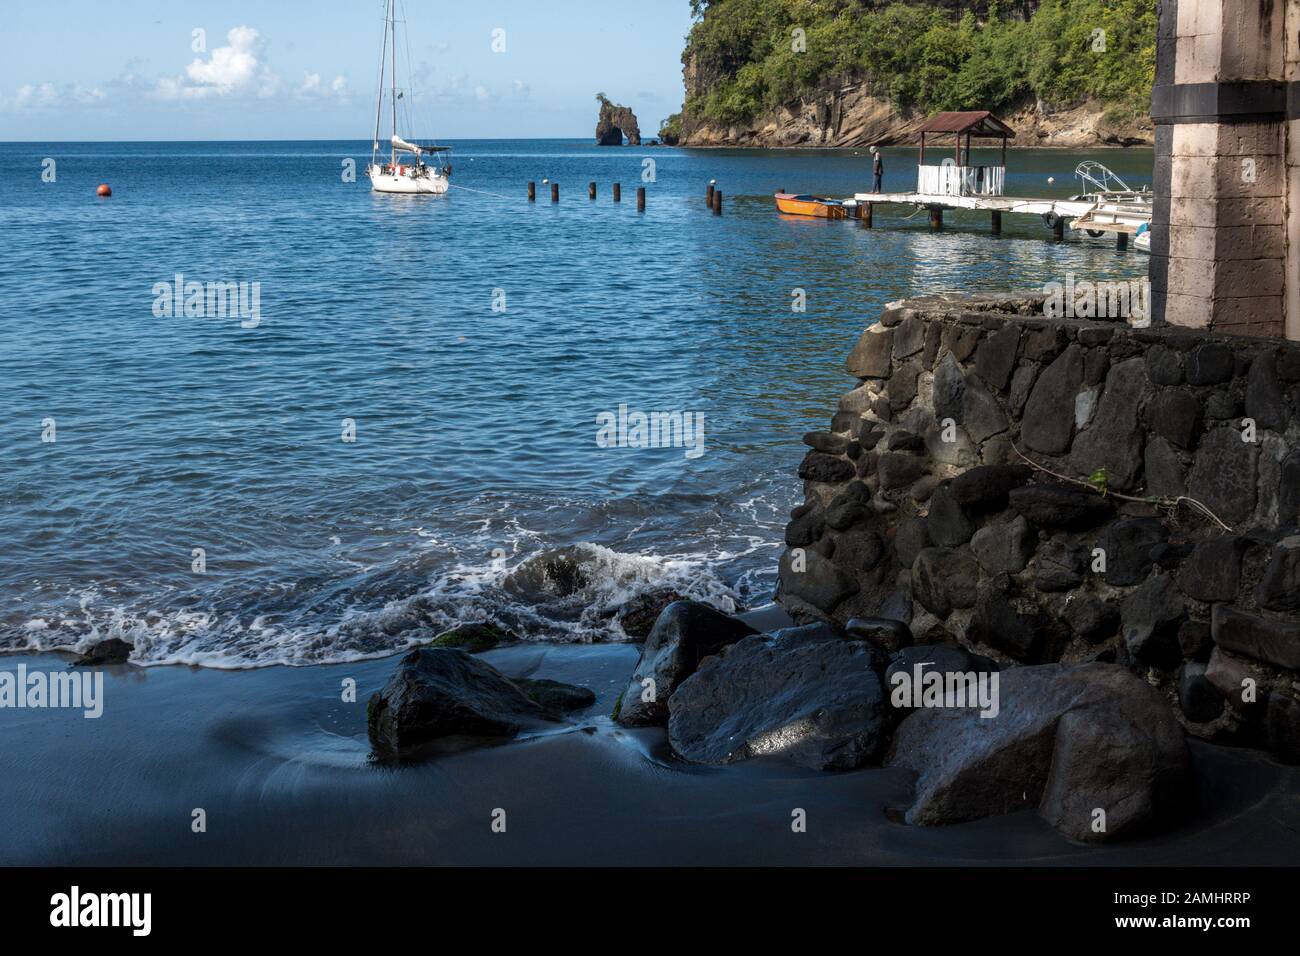 Wallilabou Bay, set of Pirates of the Caribbean movie, St. Vincent and The Grenadines, Windward Islands, Caribbean, West Indies Stock Photo